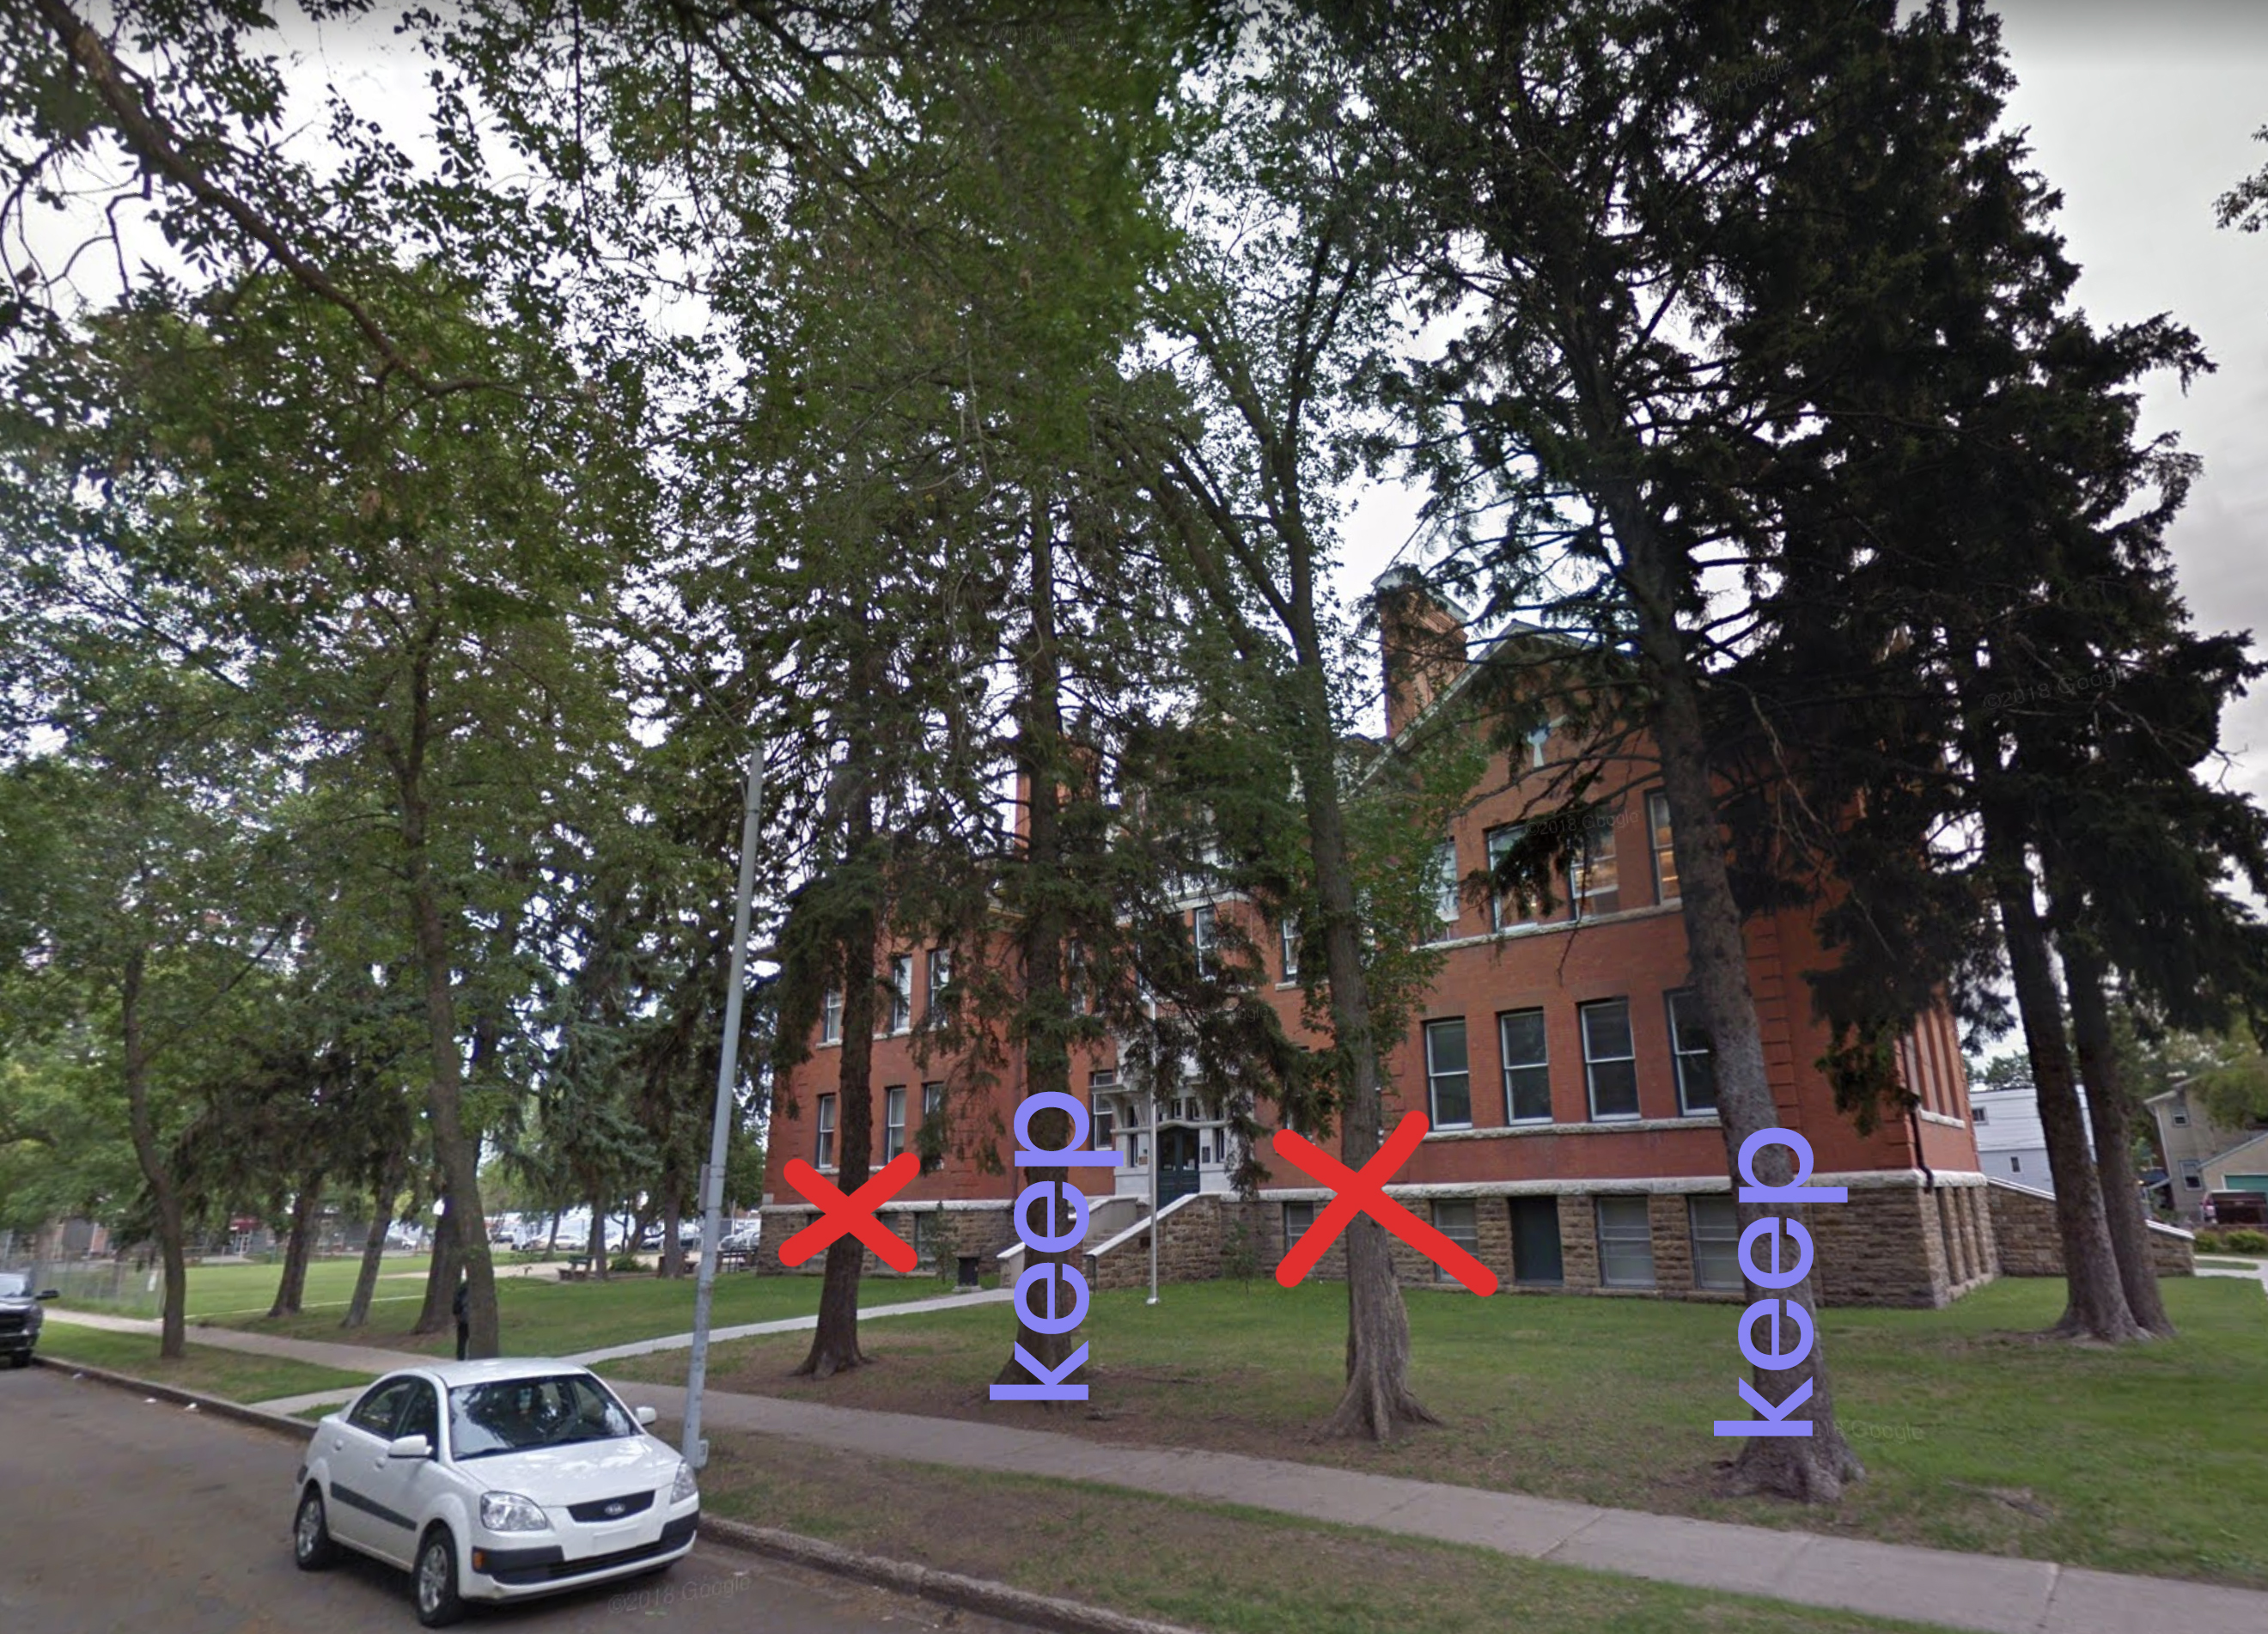 larger version of the line item image. Shows trees in a park with notes on the trees about which to keep and remove